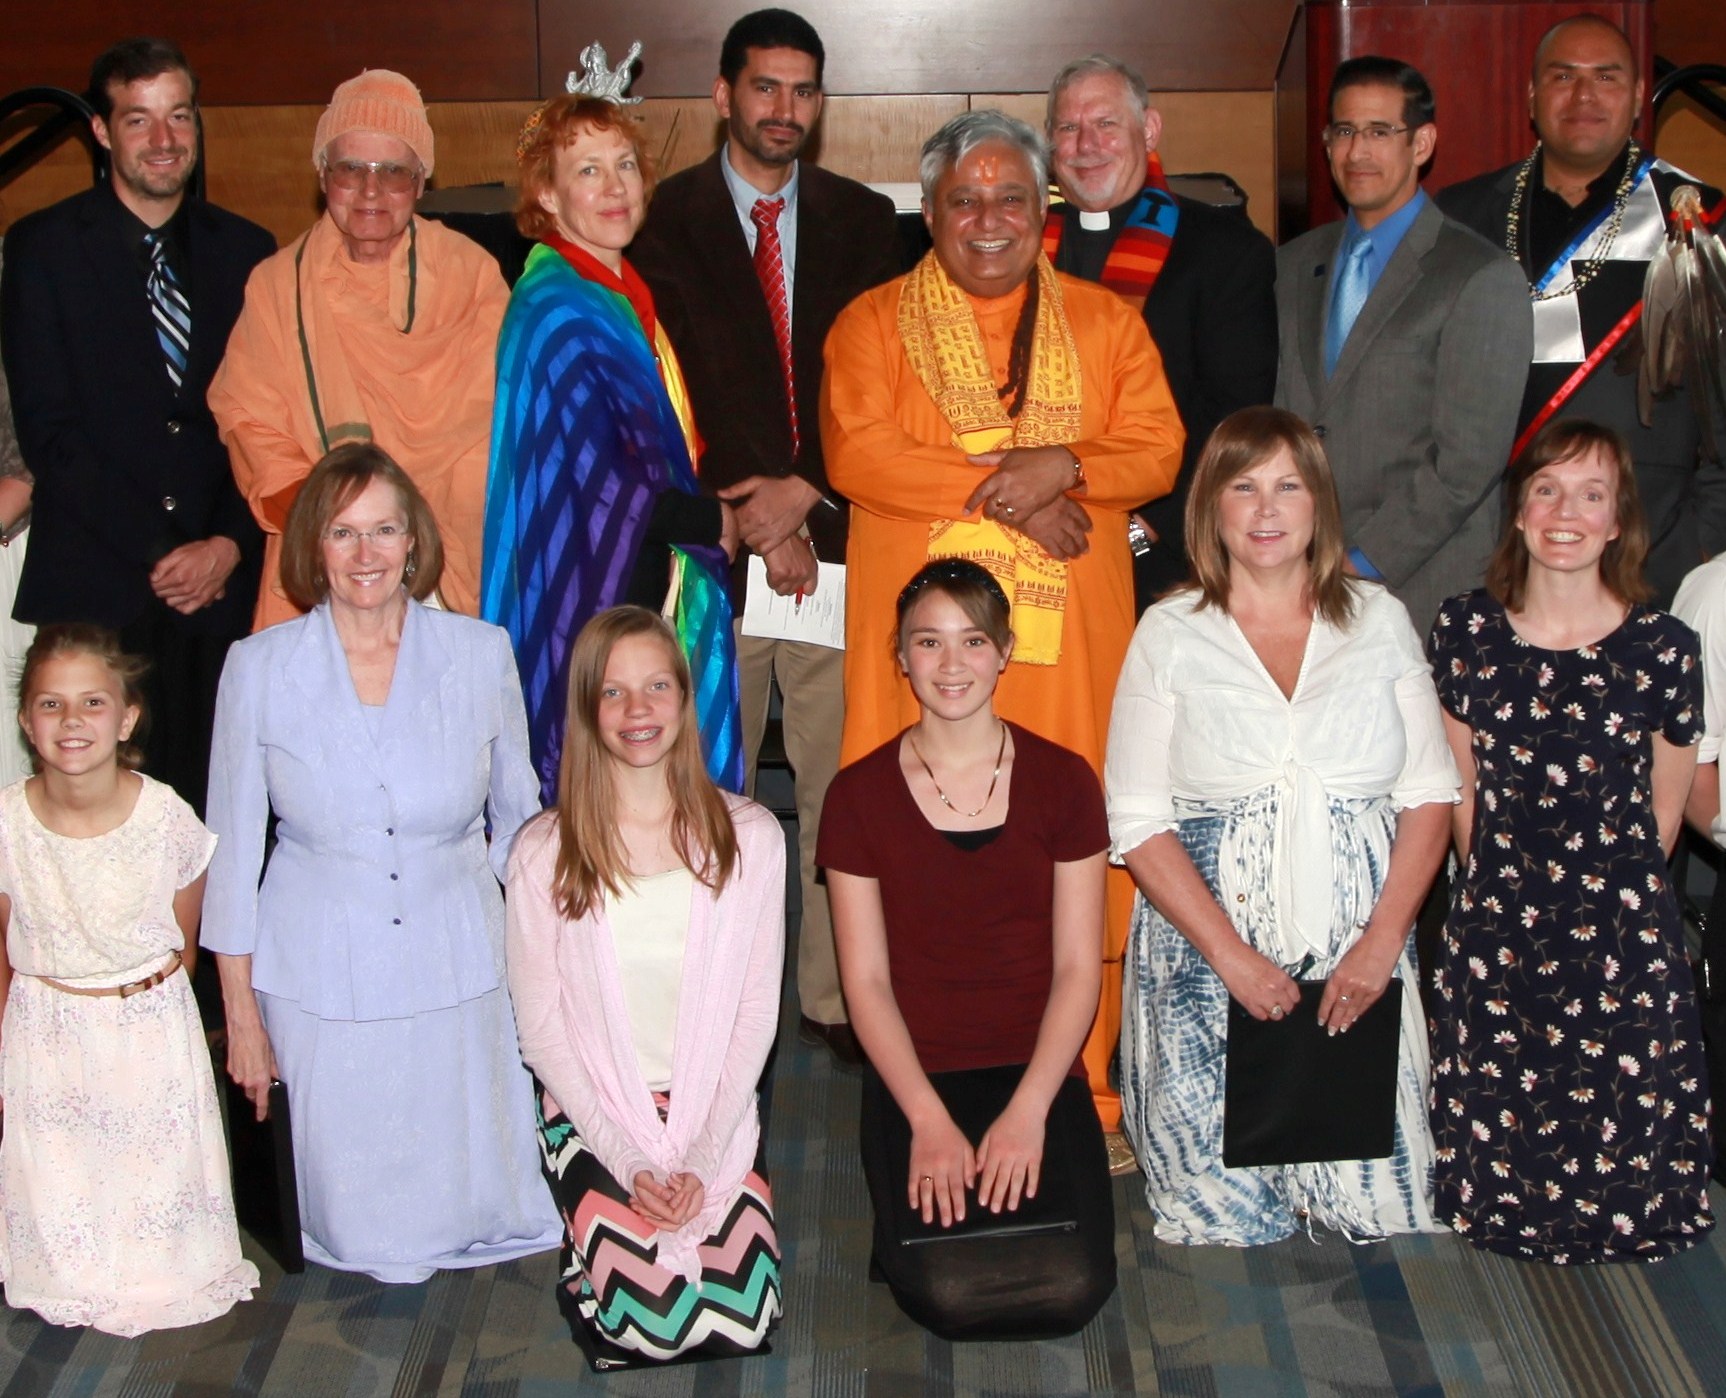 University of Nevada holds one-of-a-kind Hindu Baccalaureate Service